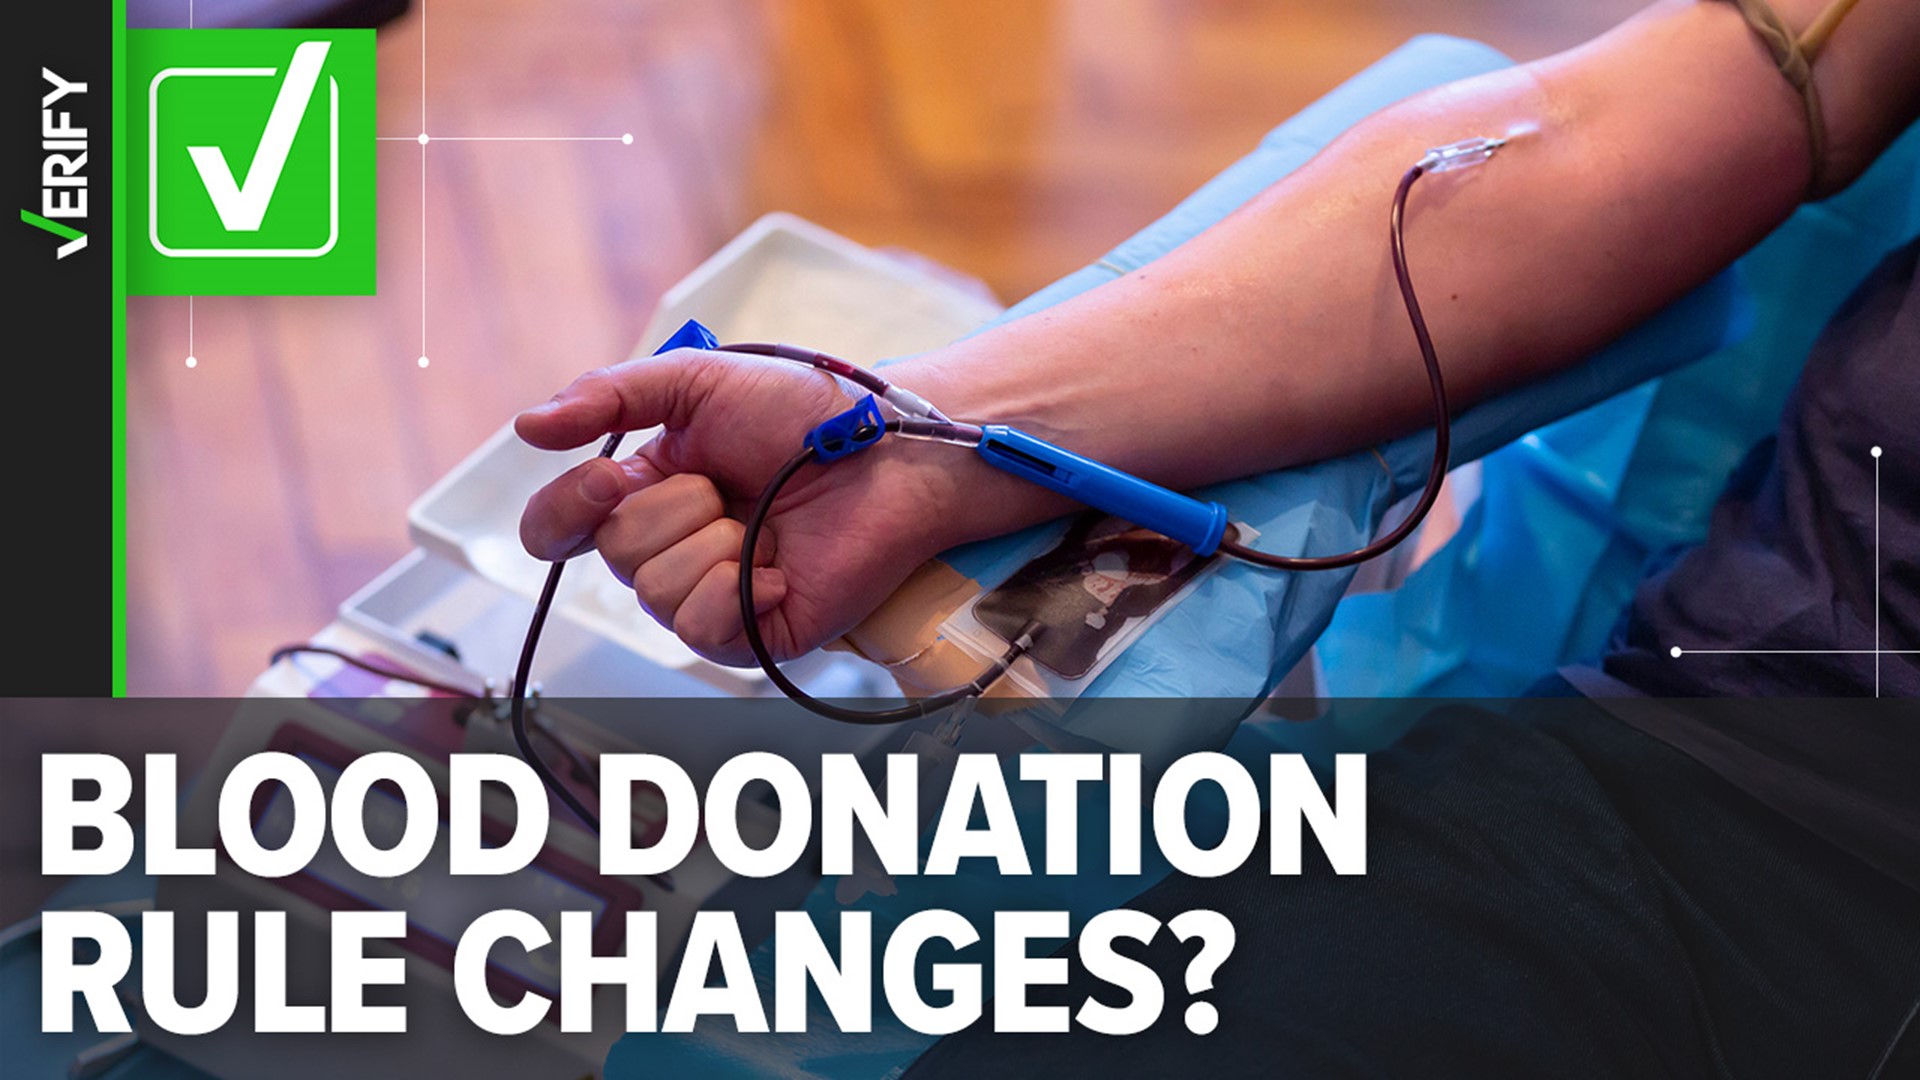 New blood donation rules will allow men who have sex with men to donate 13newsnow pic